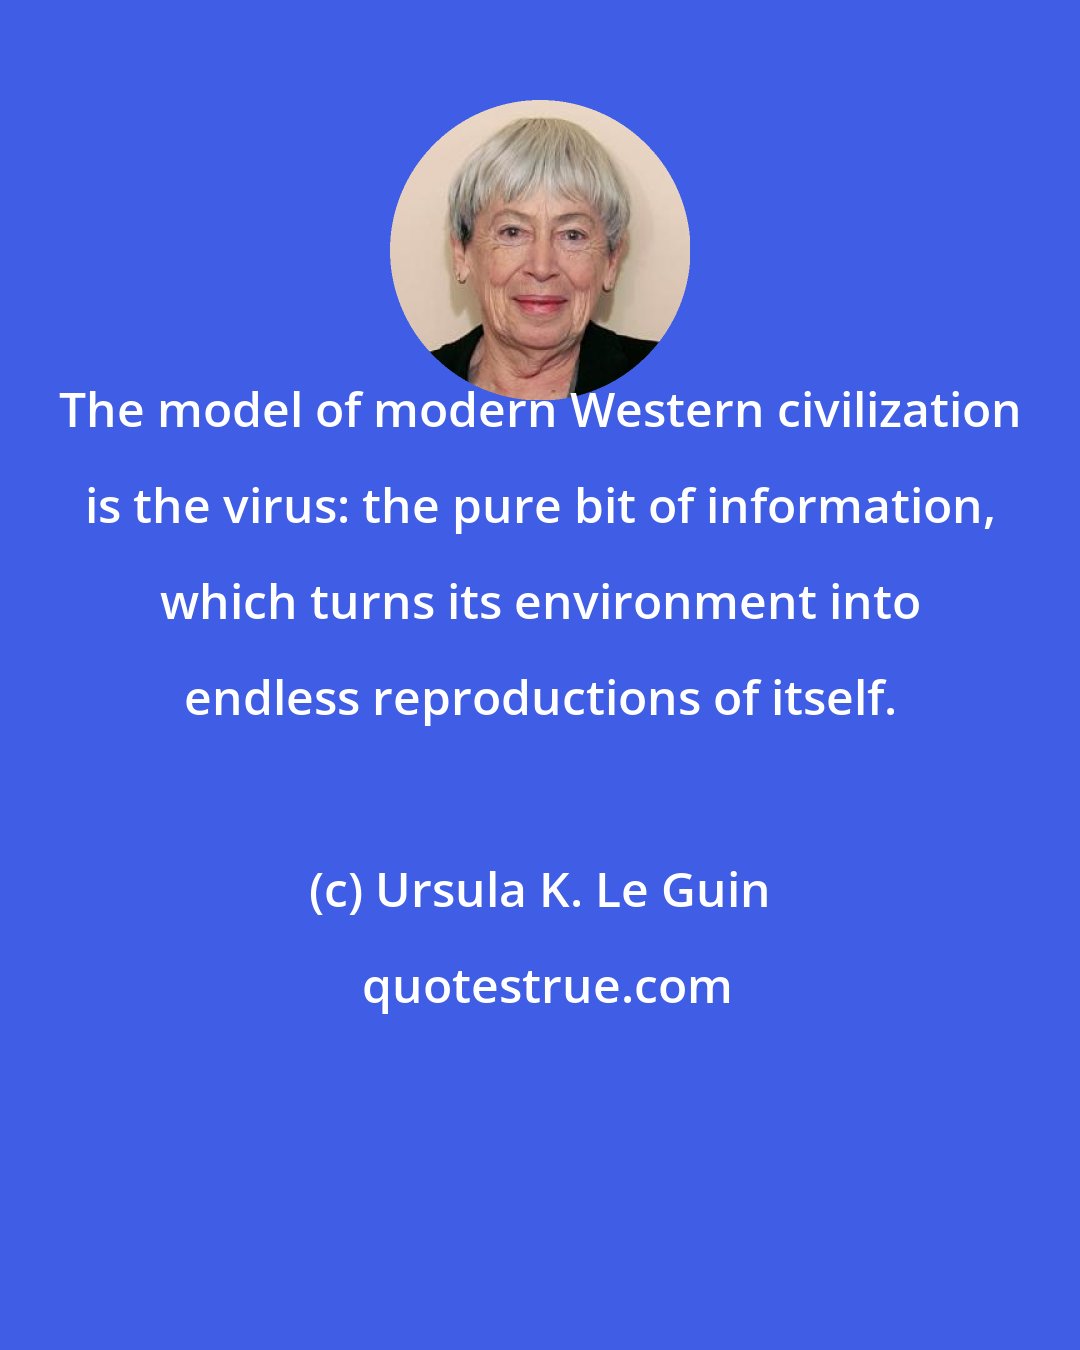 Ursula K. Le Guin: The model of modern Western civilization is the virus: the pure bit of information, which turns its environment into endless reproductions of itself.